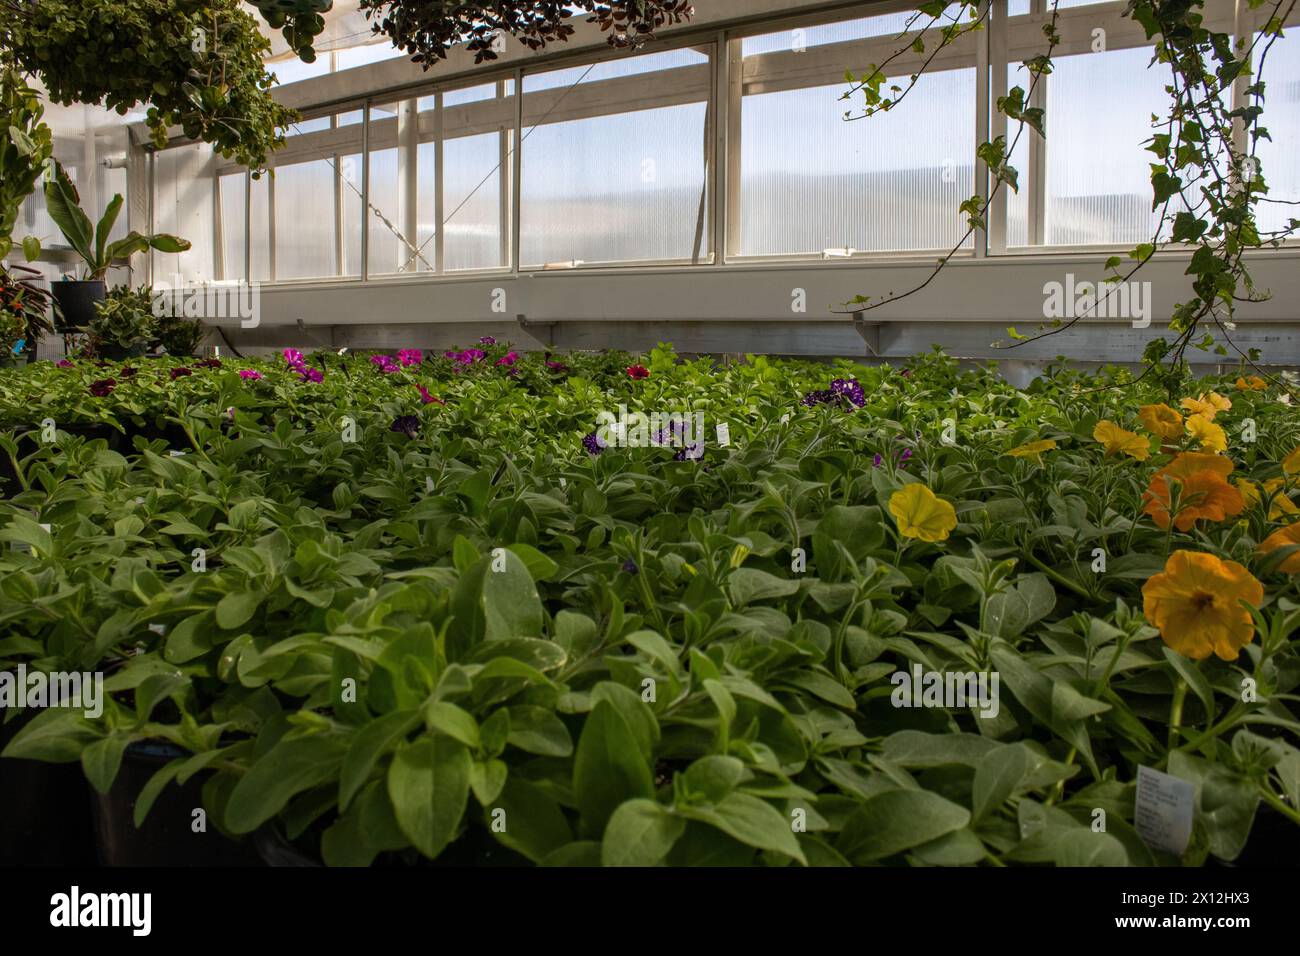 Lush greenhouse filled with colorful blooming petunias Stock Photo